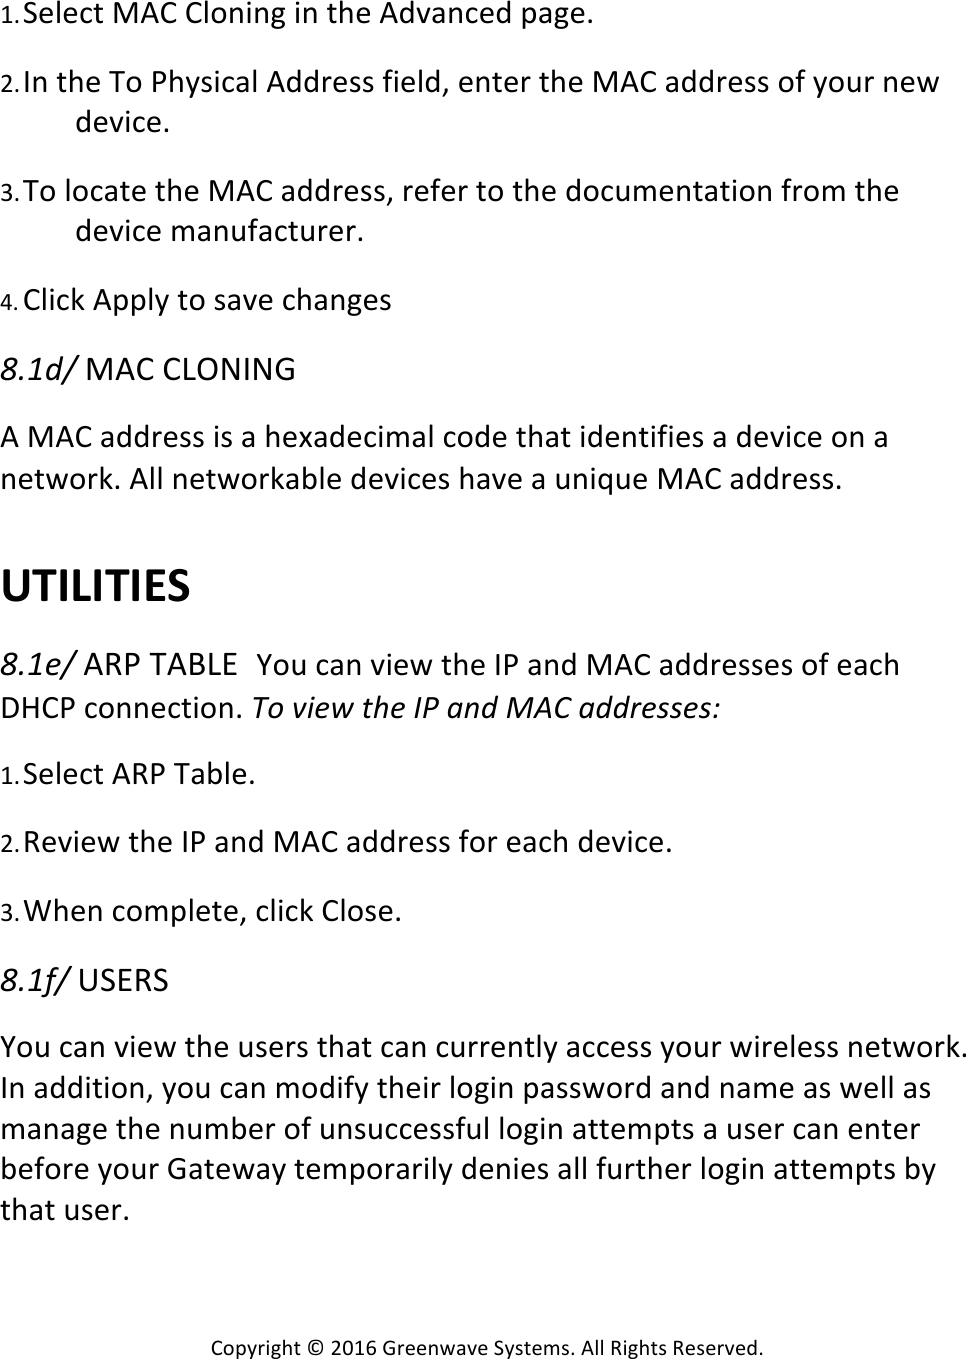 Copyright*©*2016*Greenwave*Systems.*All*Rights*Reserved.**1. Select*MAC*Cloning*in*the*Advanced*page.* *2. In*the*To*Physical*Address*field,*enter*the*MAC*address*of*your*new*device.* *3. To*locate*the*MAC*address,*refer*to*the*documentation*from*the*device*manufacturer.* *4. Click*Apply*to*save*changes**57-D.!MAC*CLONING*A*MAC*address*is*a*hexadecimal*code*that*identifies*a*device*on*a*network.*All*networkable*devices*have*a*unique*MAC*address.*****UTILITIES%*57-).!ARP*TABLE You*can*view*the*IP*and*MAC*addresses*of*each*DHCP*connection.*V9!Y#)*!(Q)!WT!&apos;@D!_IU!&apos;DD;)AA)AB!*1. Select*ARP*Table.* *2. Review*the*IP*and*MAC*address*for*each*device.* *3. When*complete,*click*Close.* *57-E.!USERS**You*can*view*the*users*that*can*currently*access*your*wireless*network.*In*addition,*you*can*modify*their*login*password*and*name*as*well*as*manage*the*number*of*unsuccessful*login*attempts*a*user*can*enter*before*your*Gateway*temporarily*denies*all*further*login*attempts*by*that*user.******